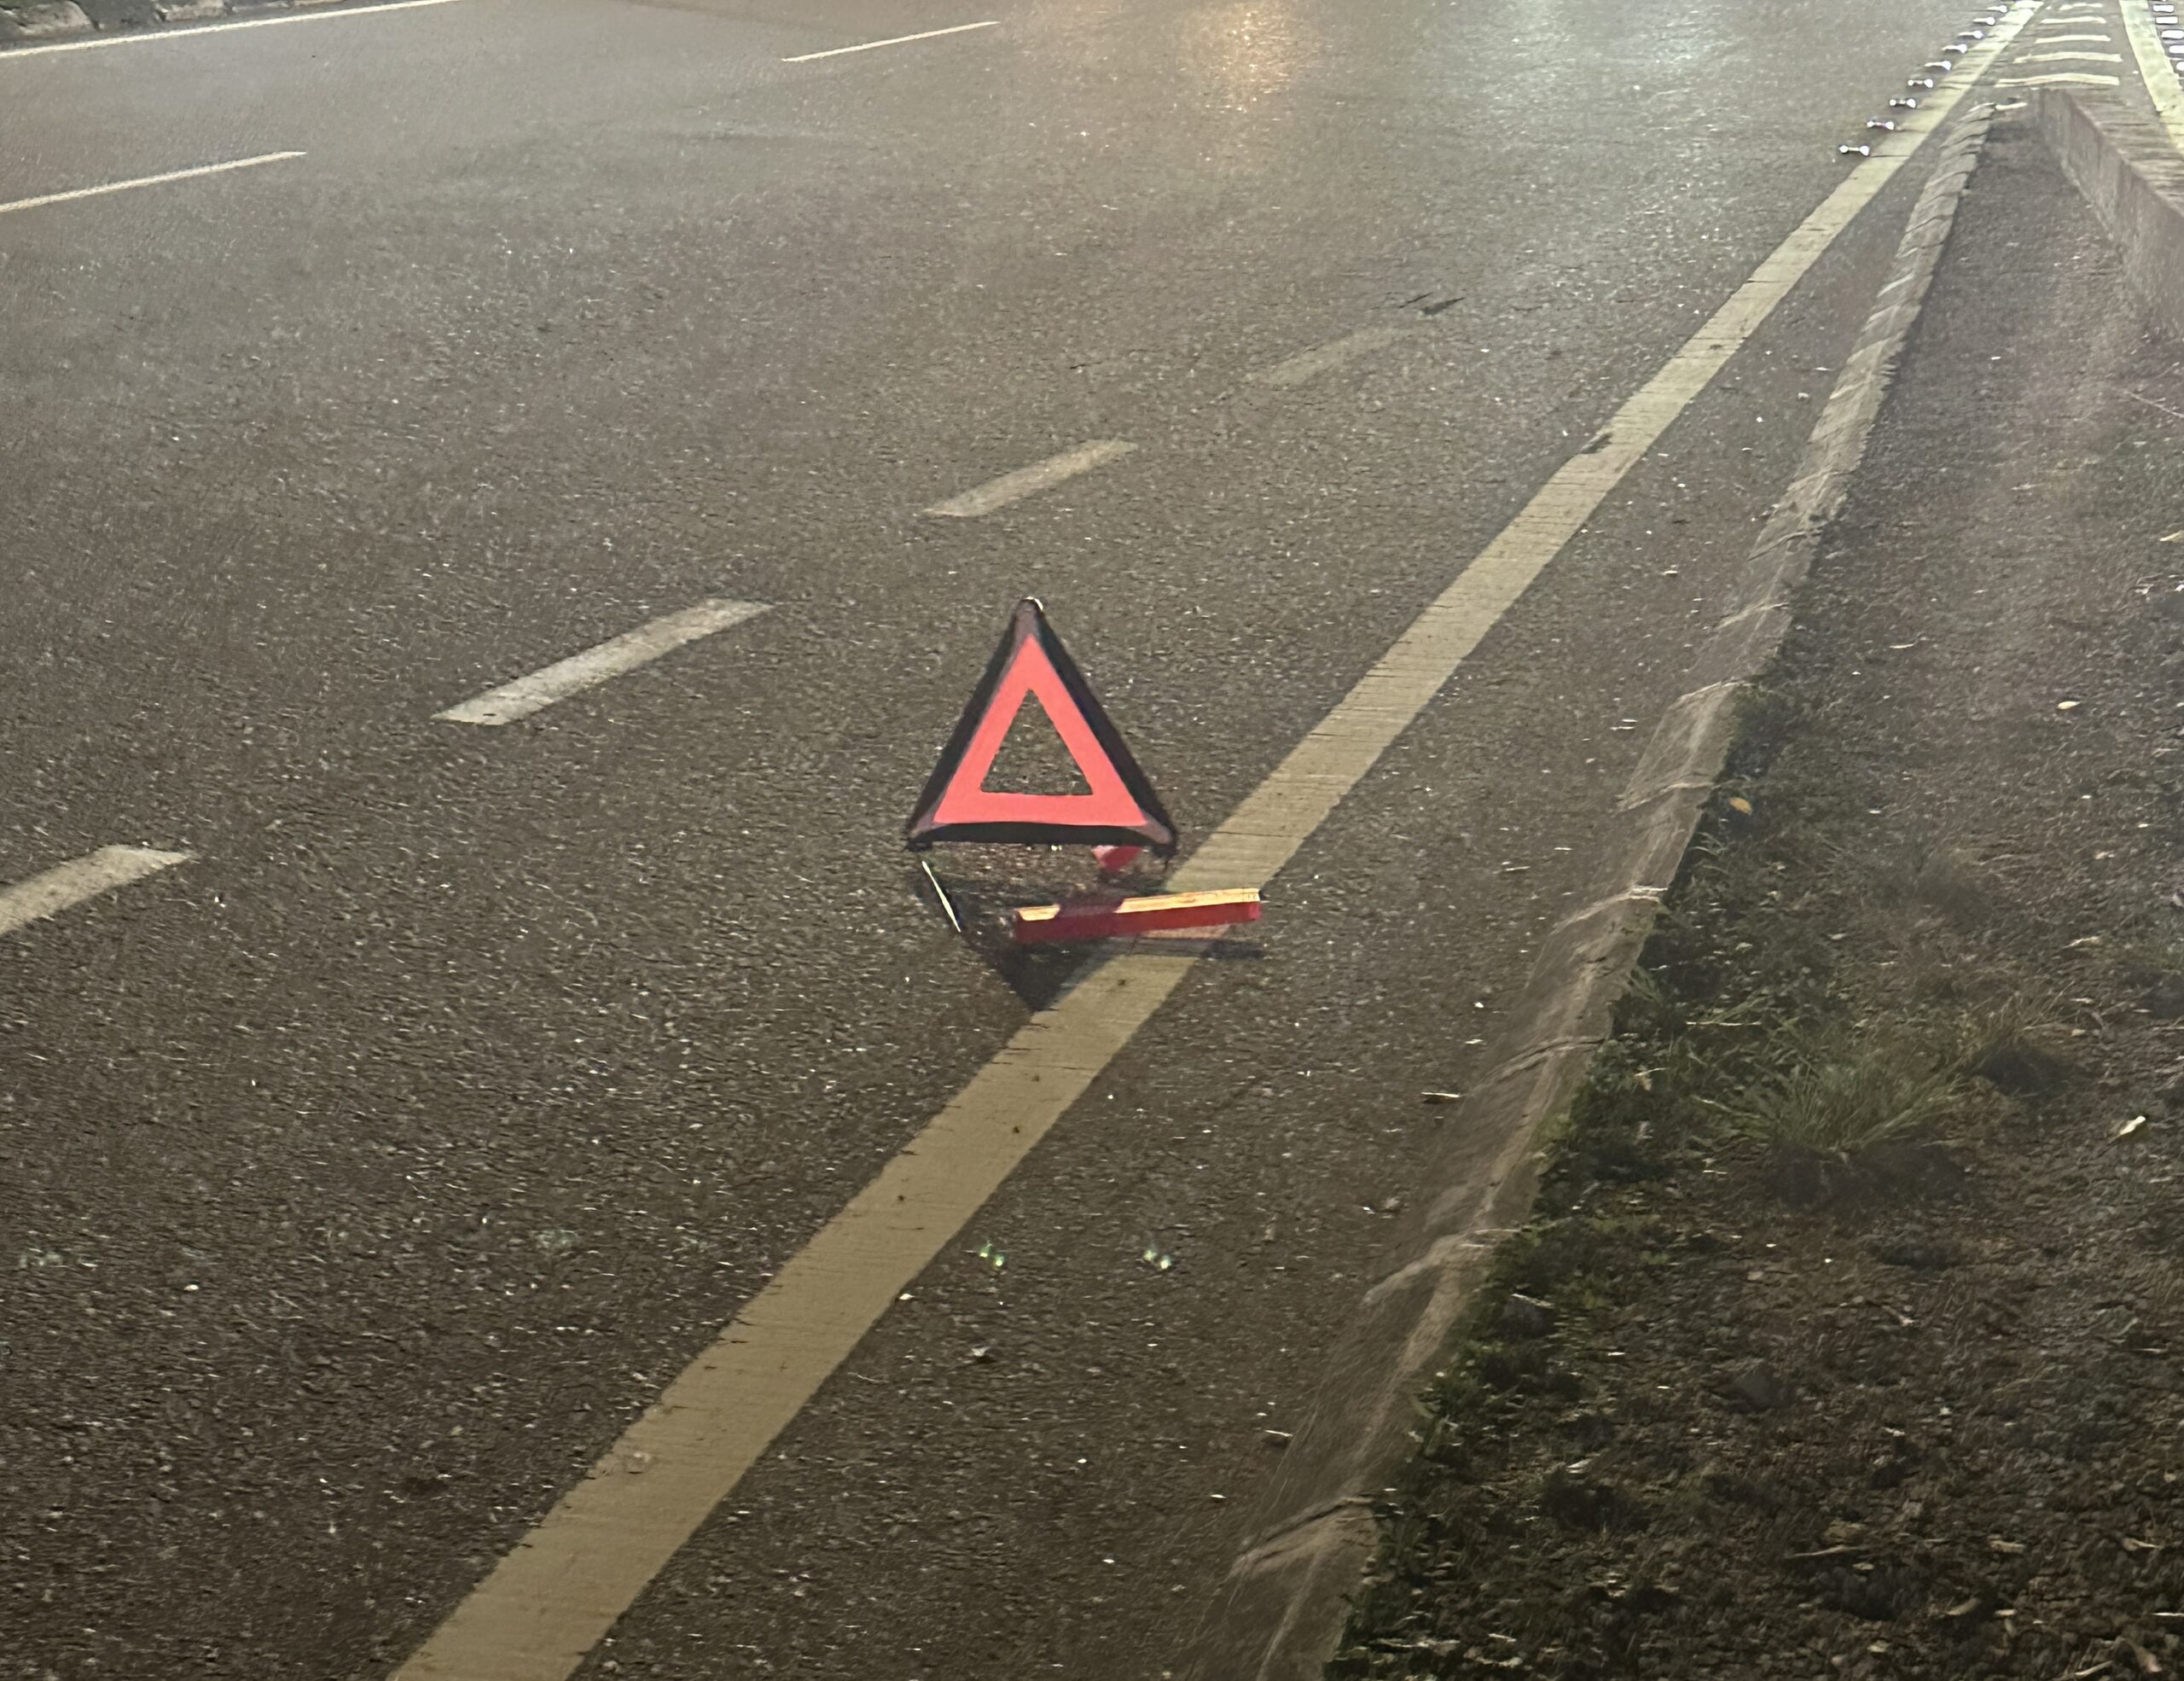 Warning triangle for other drivers